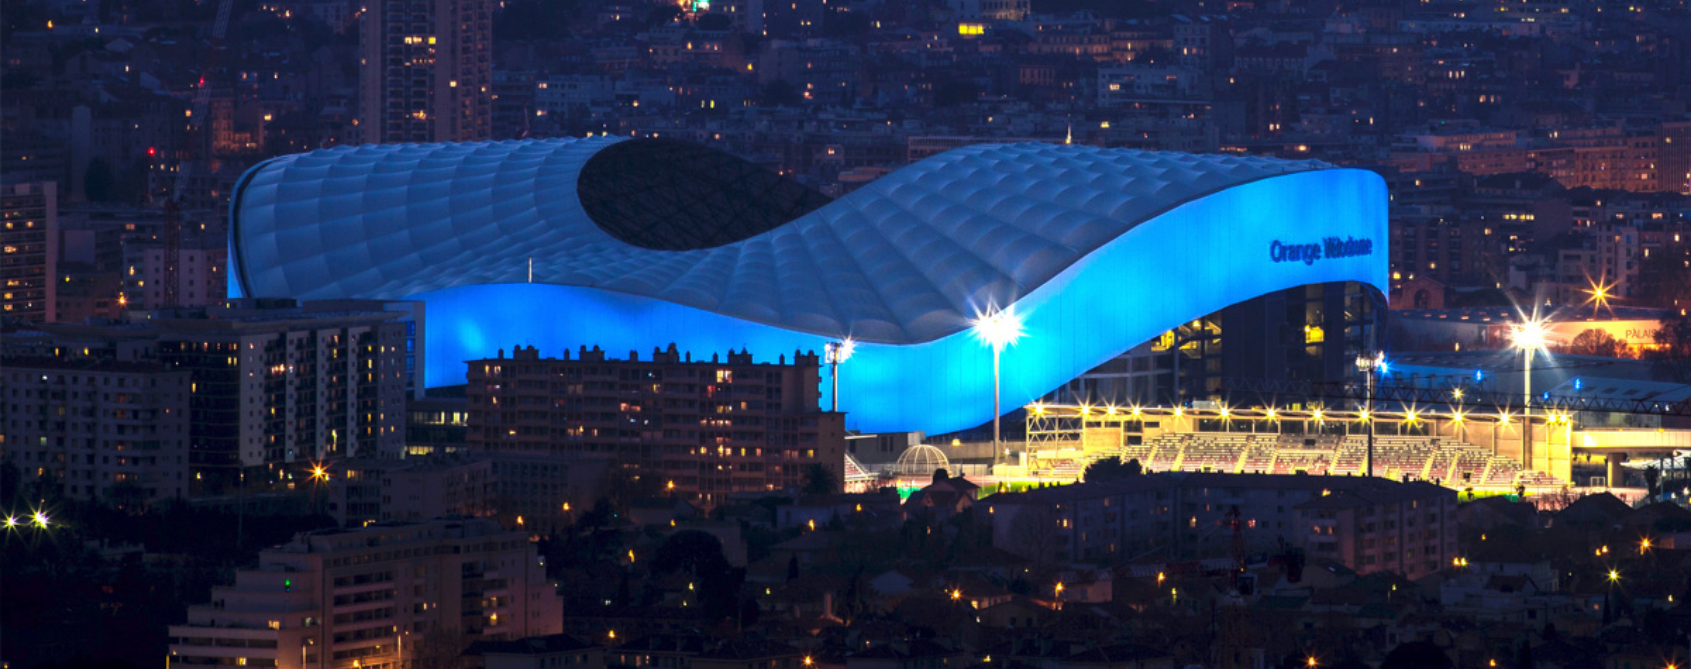 View of the OM stadium Le Vélodrôme by night